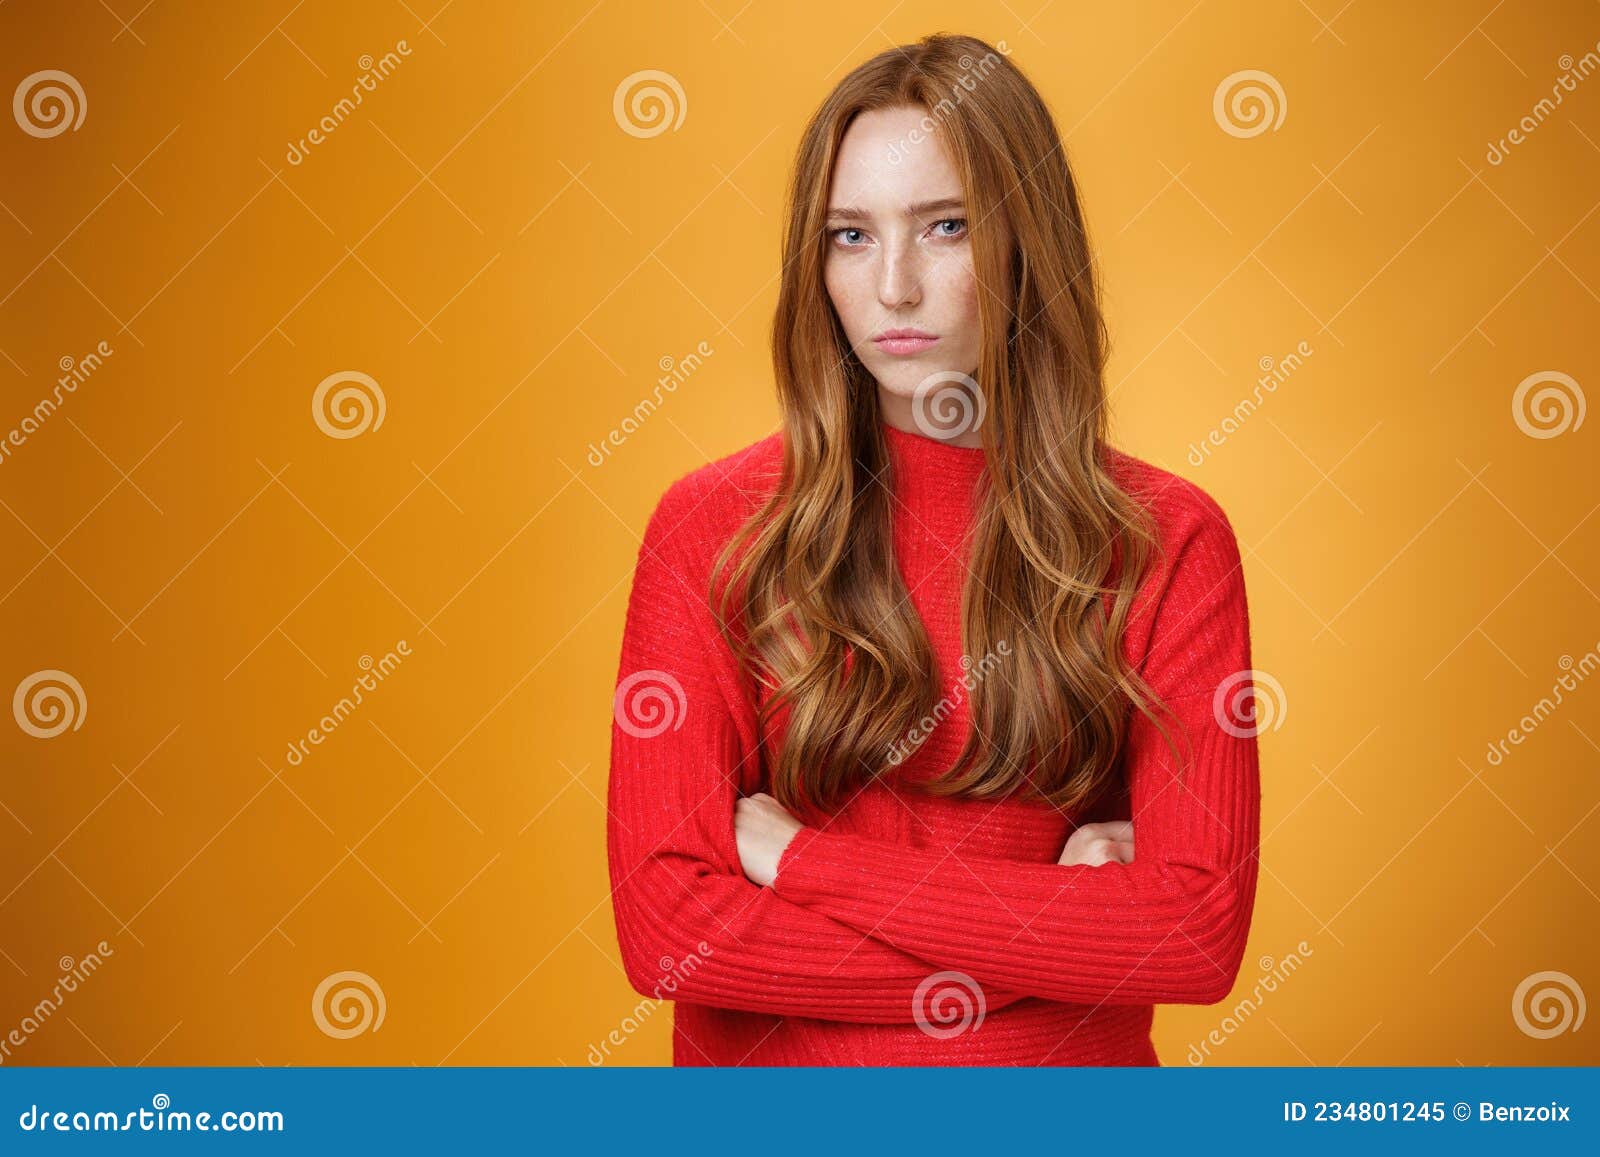 suspicious intense and defensive ginger girl standing in passive-aggressive pose pouting and frowning looking with